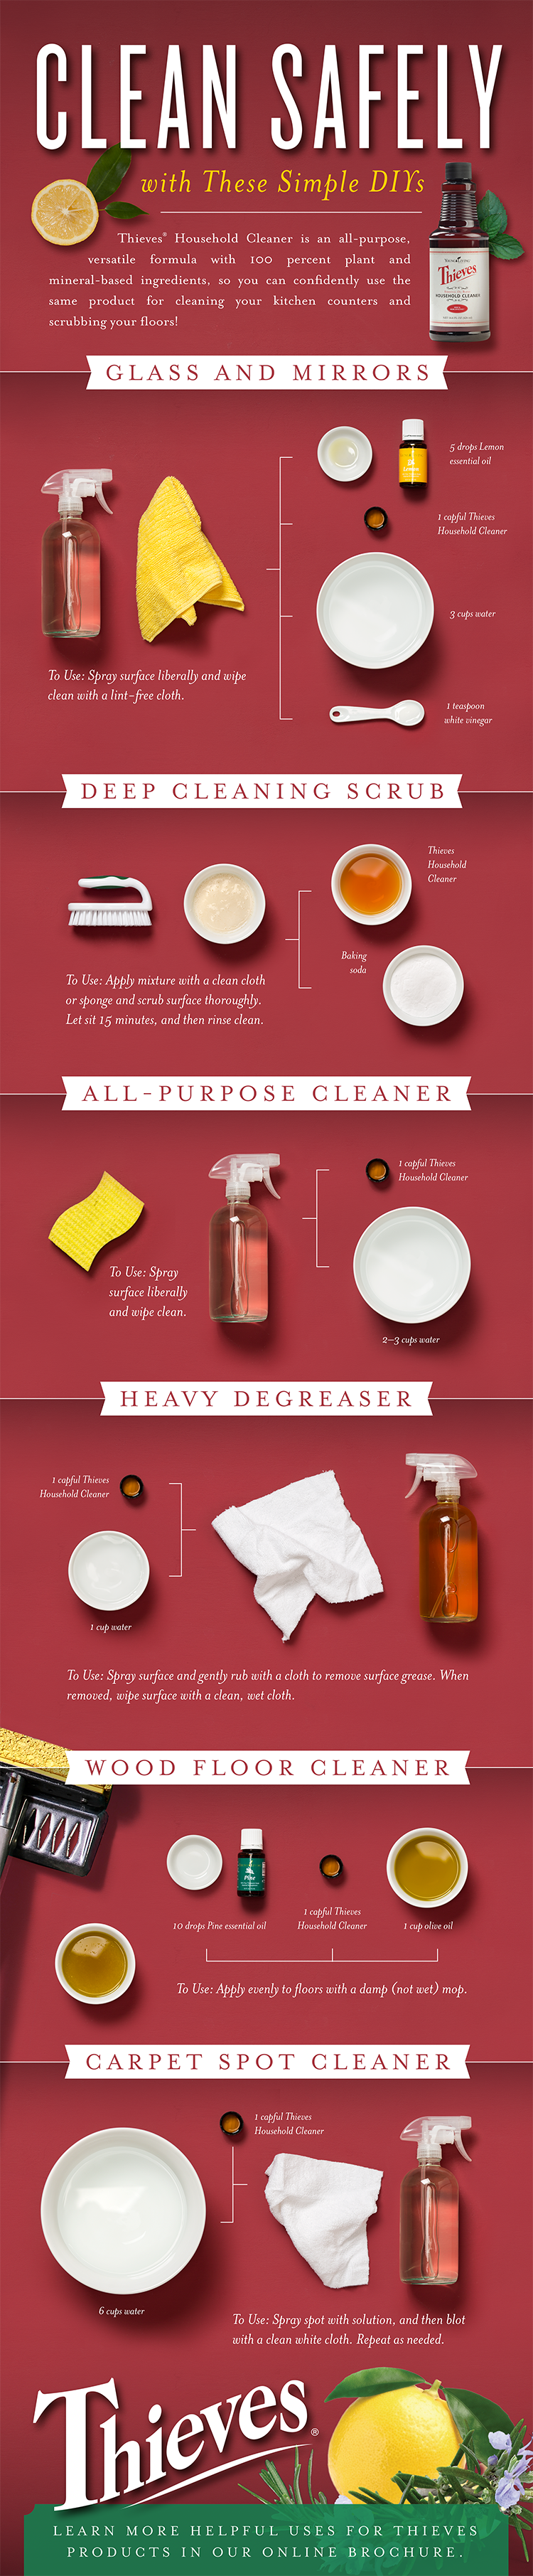 Young Living Thieves Household Cleaner